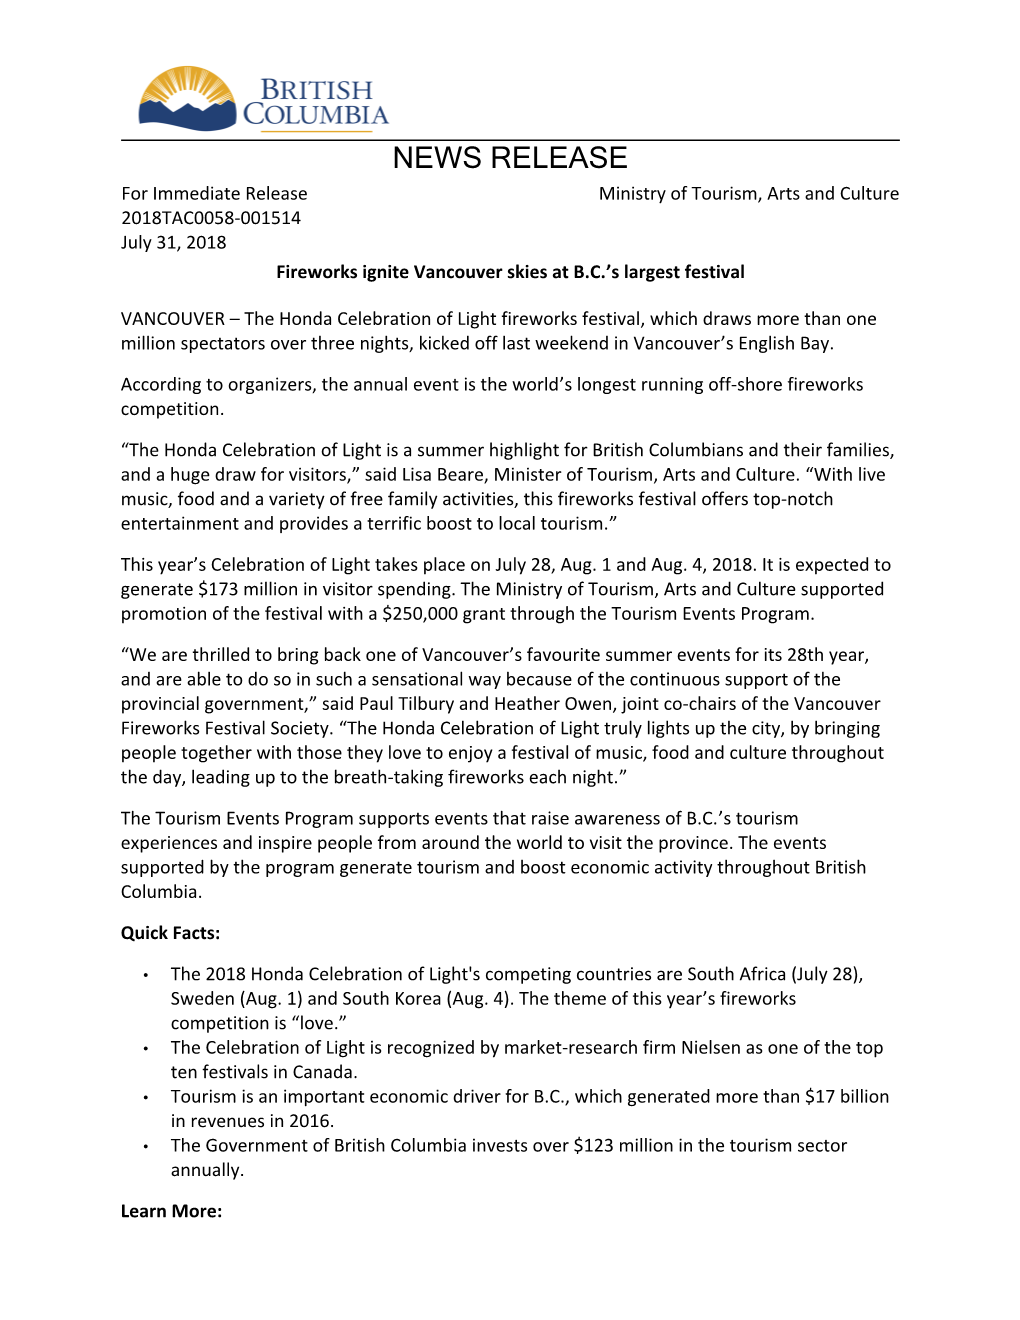 NEWS RELEASE for Immediate Release Ministry of Tourism, Arts and Culture 2018TAC0058-001514 July 31, 2018 Fireworks Ignite Vancouver Skies at B.C.’S Largest Festival